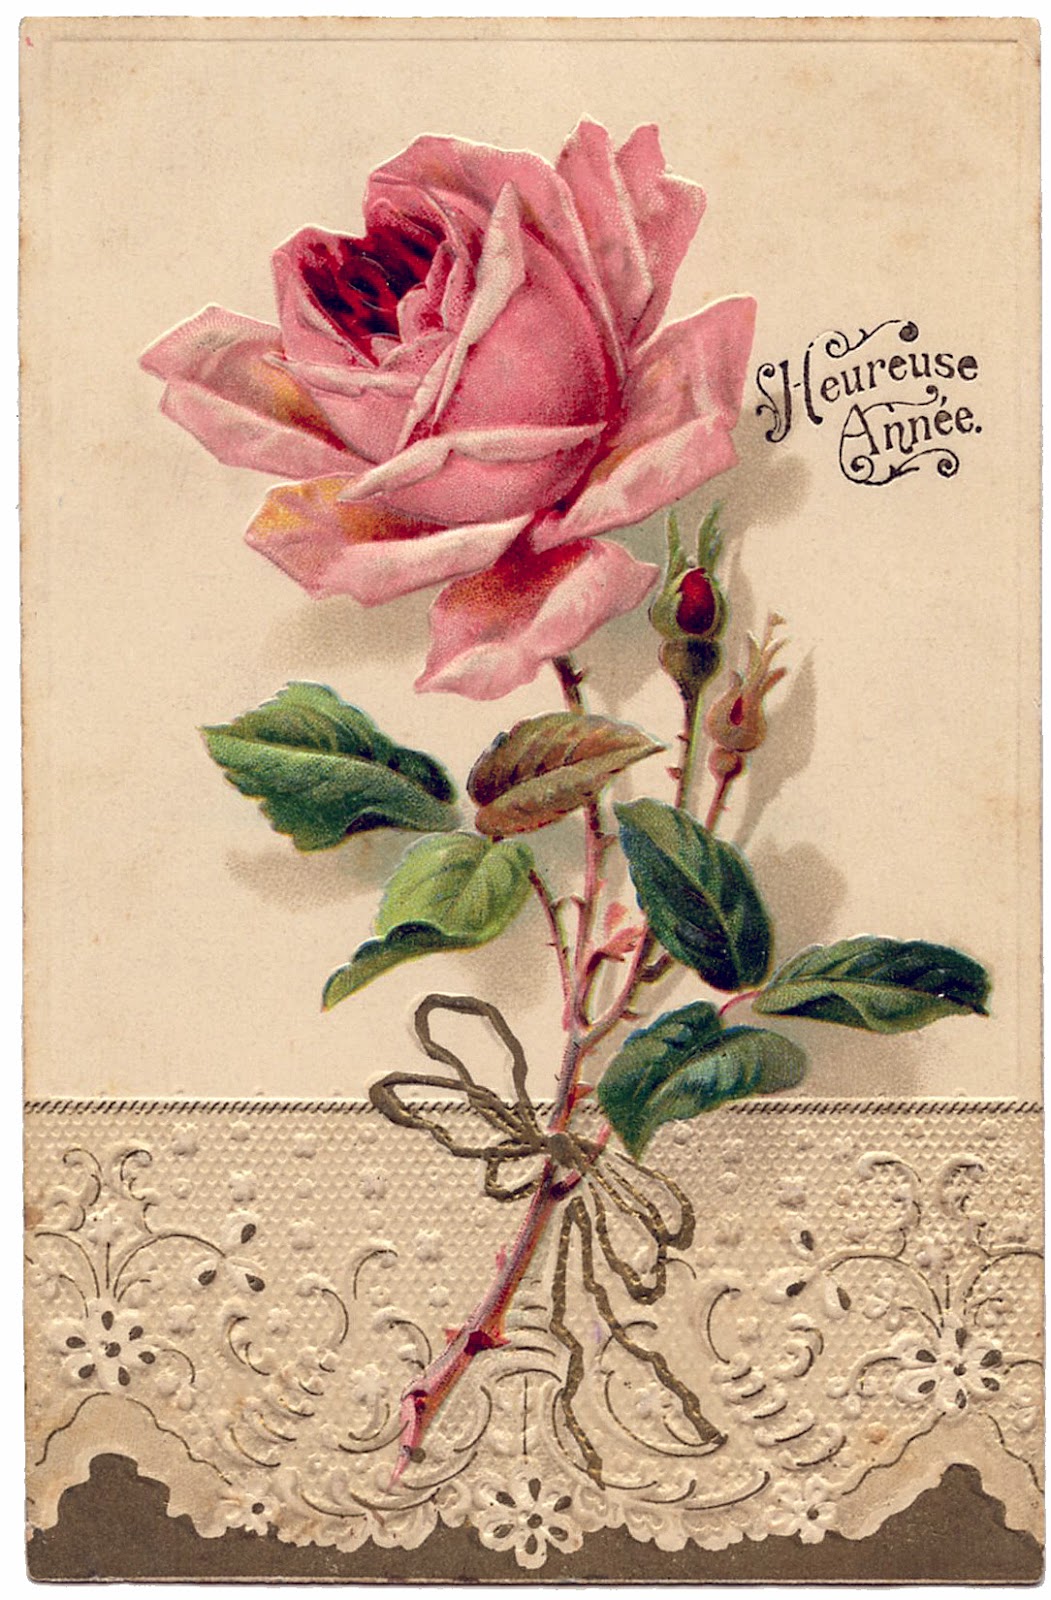 French Image - Beautiful Rose with Lace - The Graphics Fairy